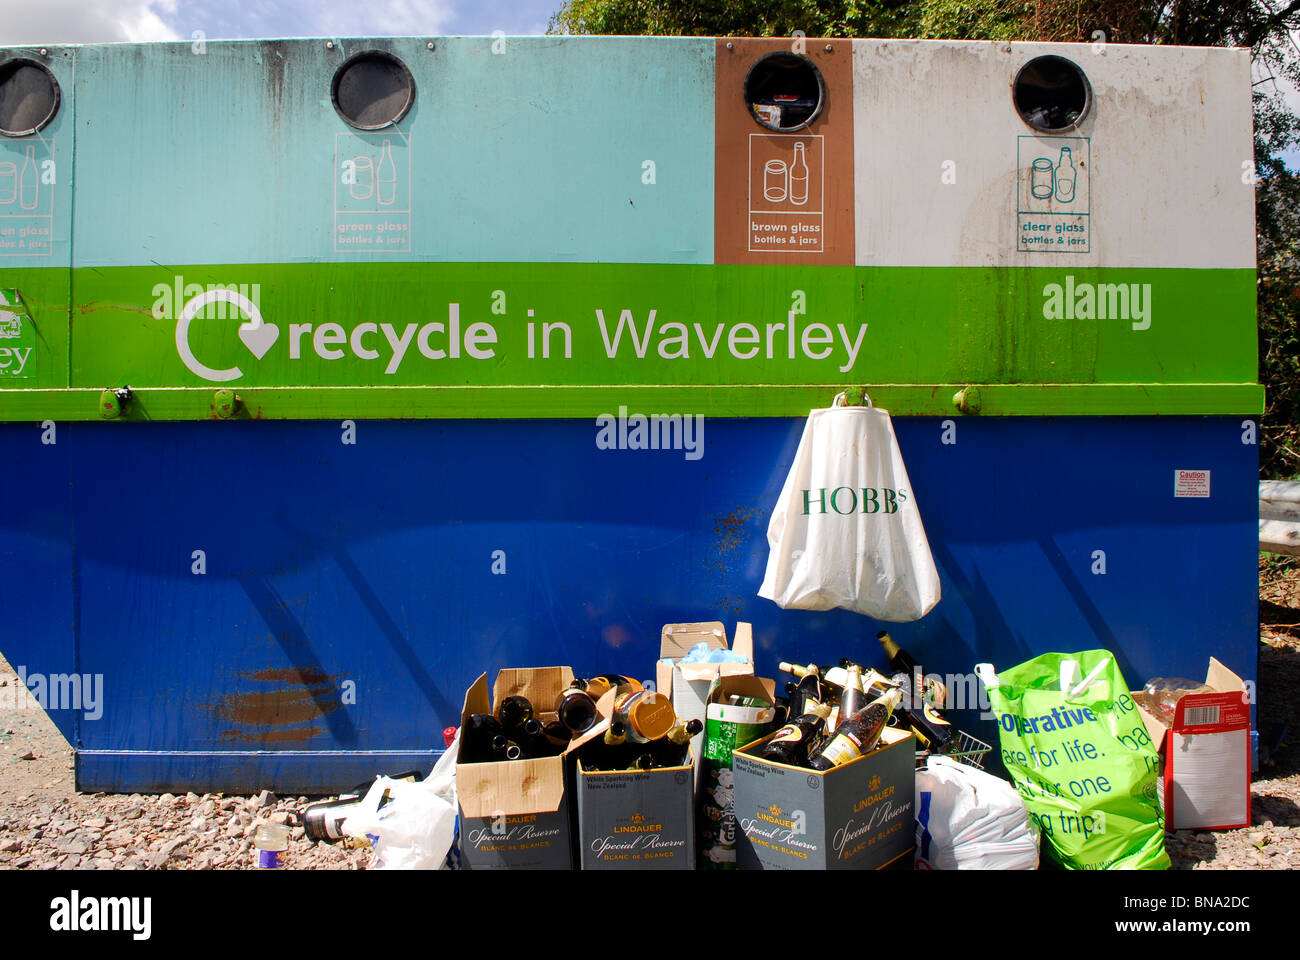 Recycling skip in Haslemere provided by Waverley Borough Council, Haslemere, Surrey, UK. Stock Photo